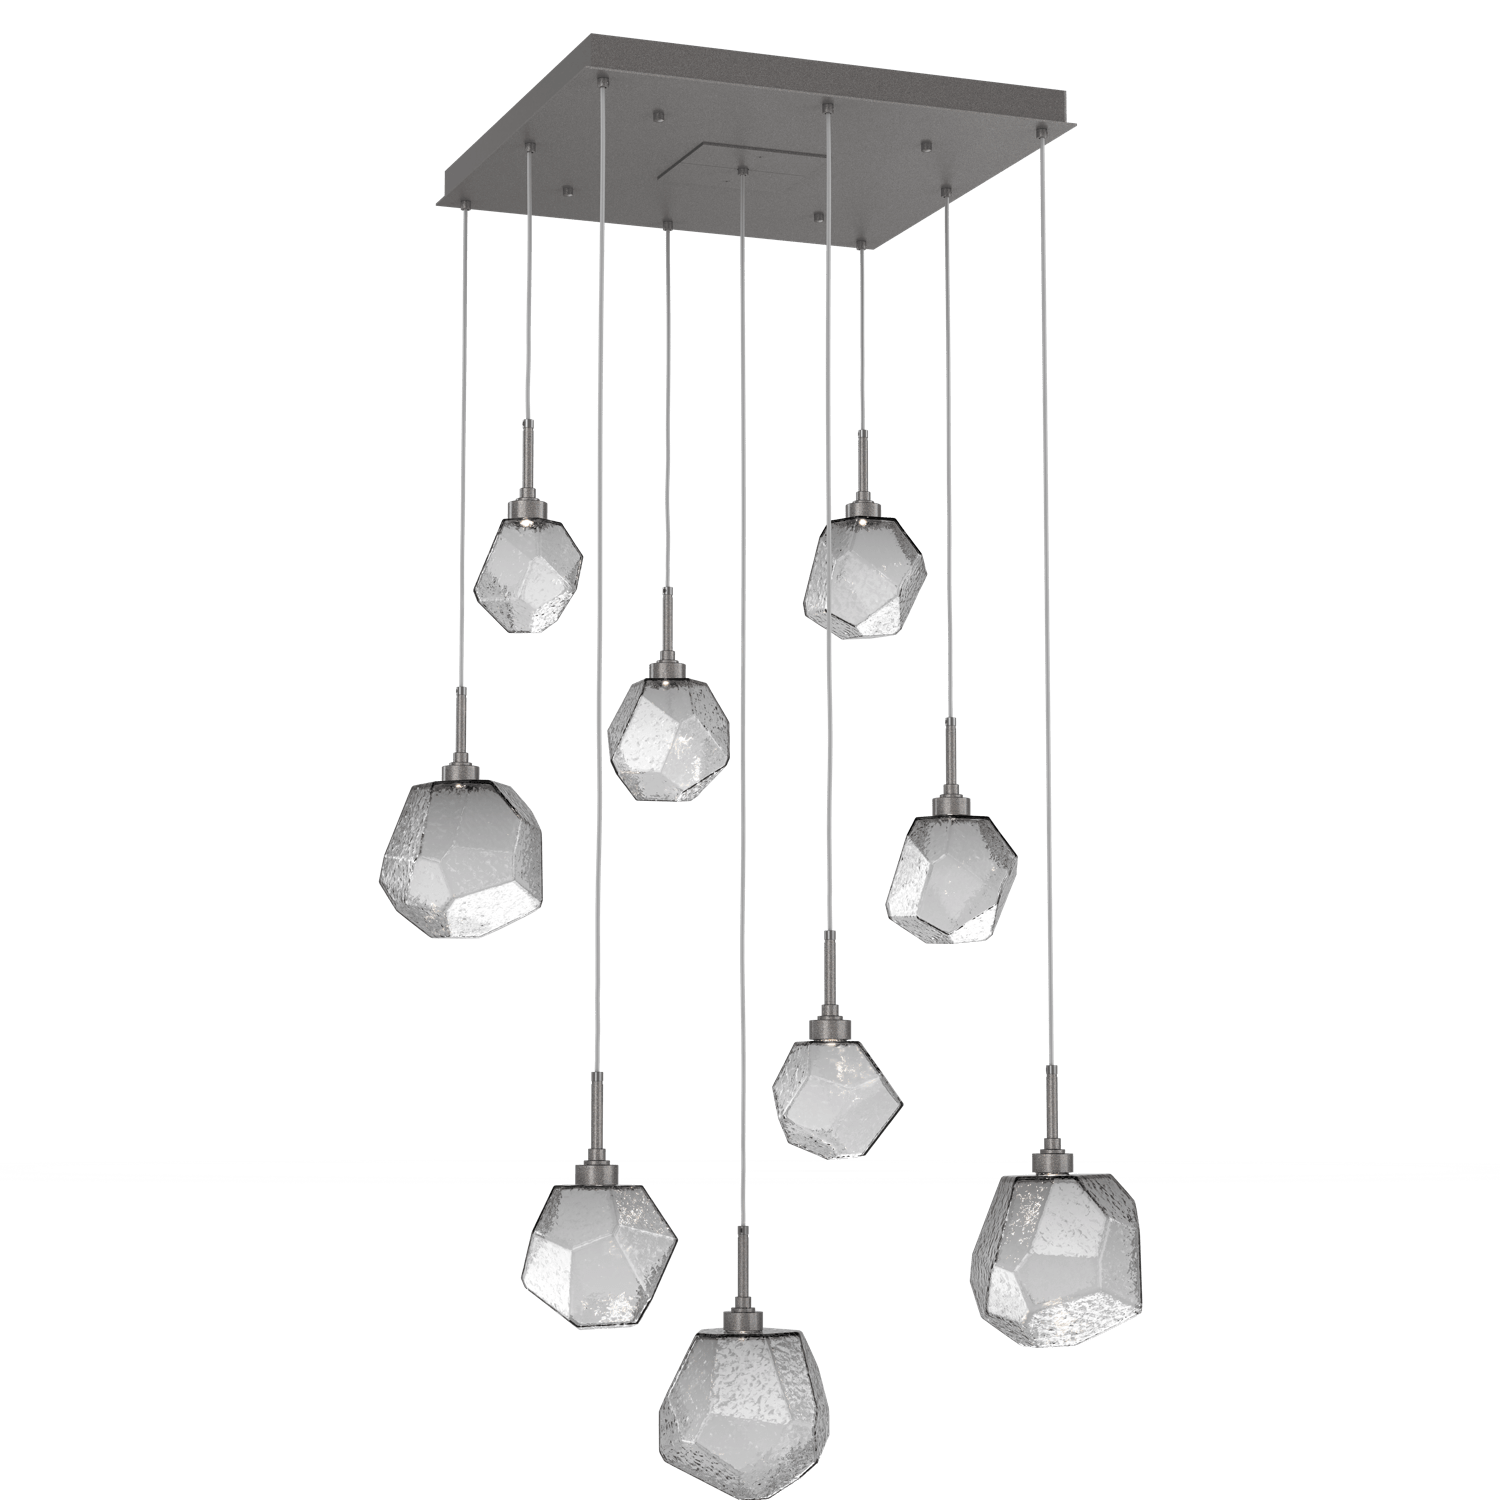 CHB0039-09-GP-S-Hammerton-Studio-Gem-9-light-square-pendant-chandelier-with-graphite-finish-and-smoke-blown-glass-shades-and-LED-lamping